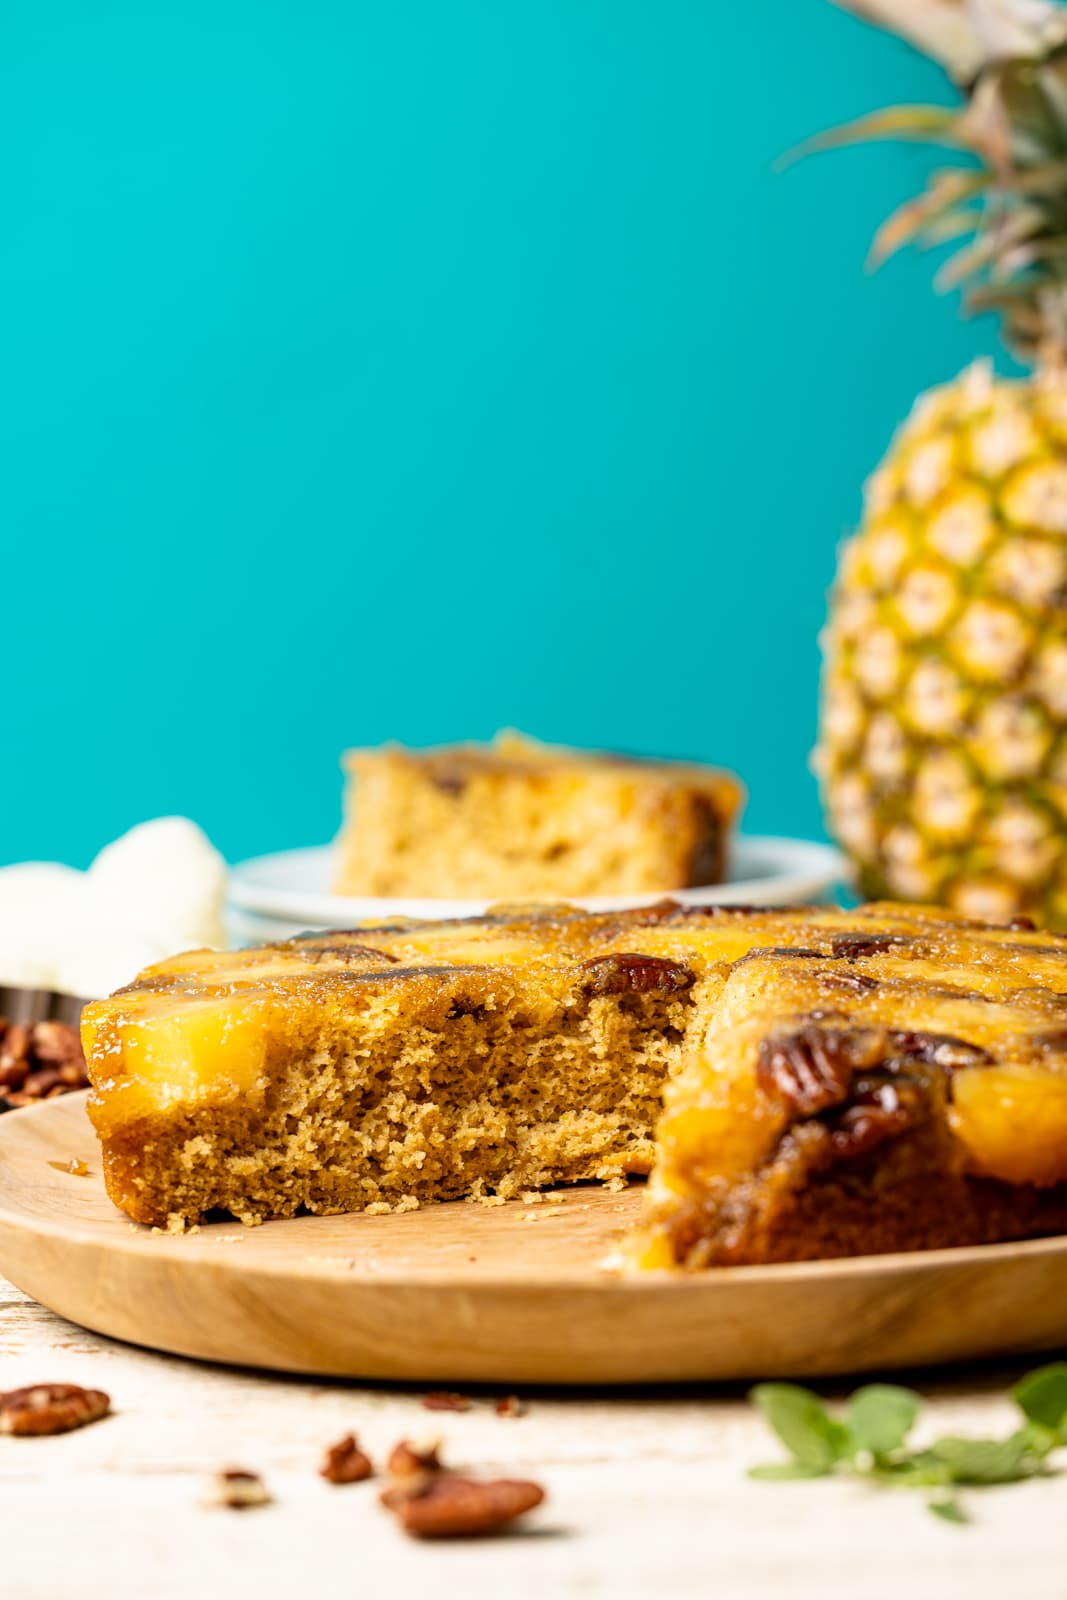 Cake with a slice with a pineapple in the background and pecans as garnish. A delicious fruity dessert